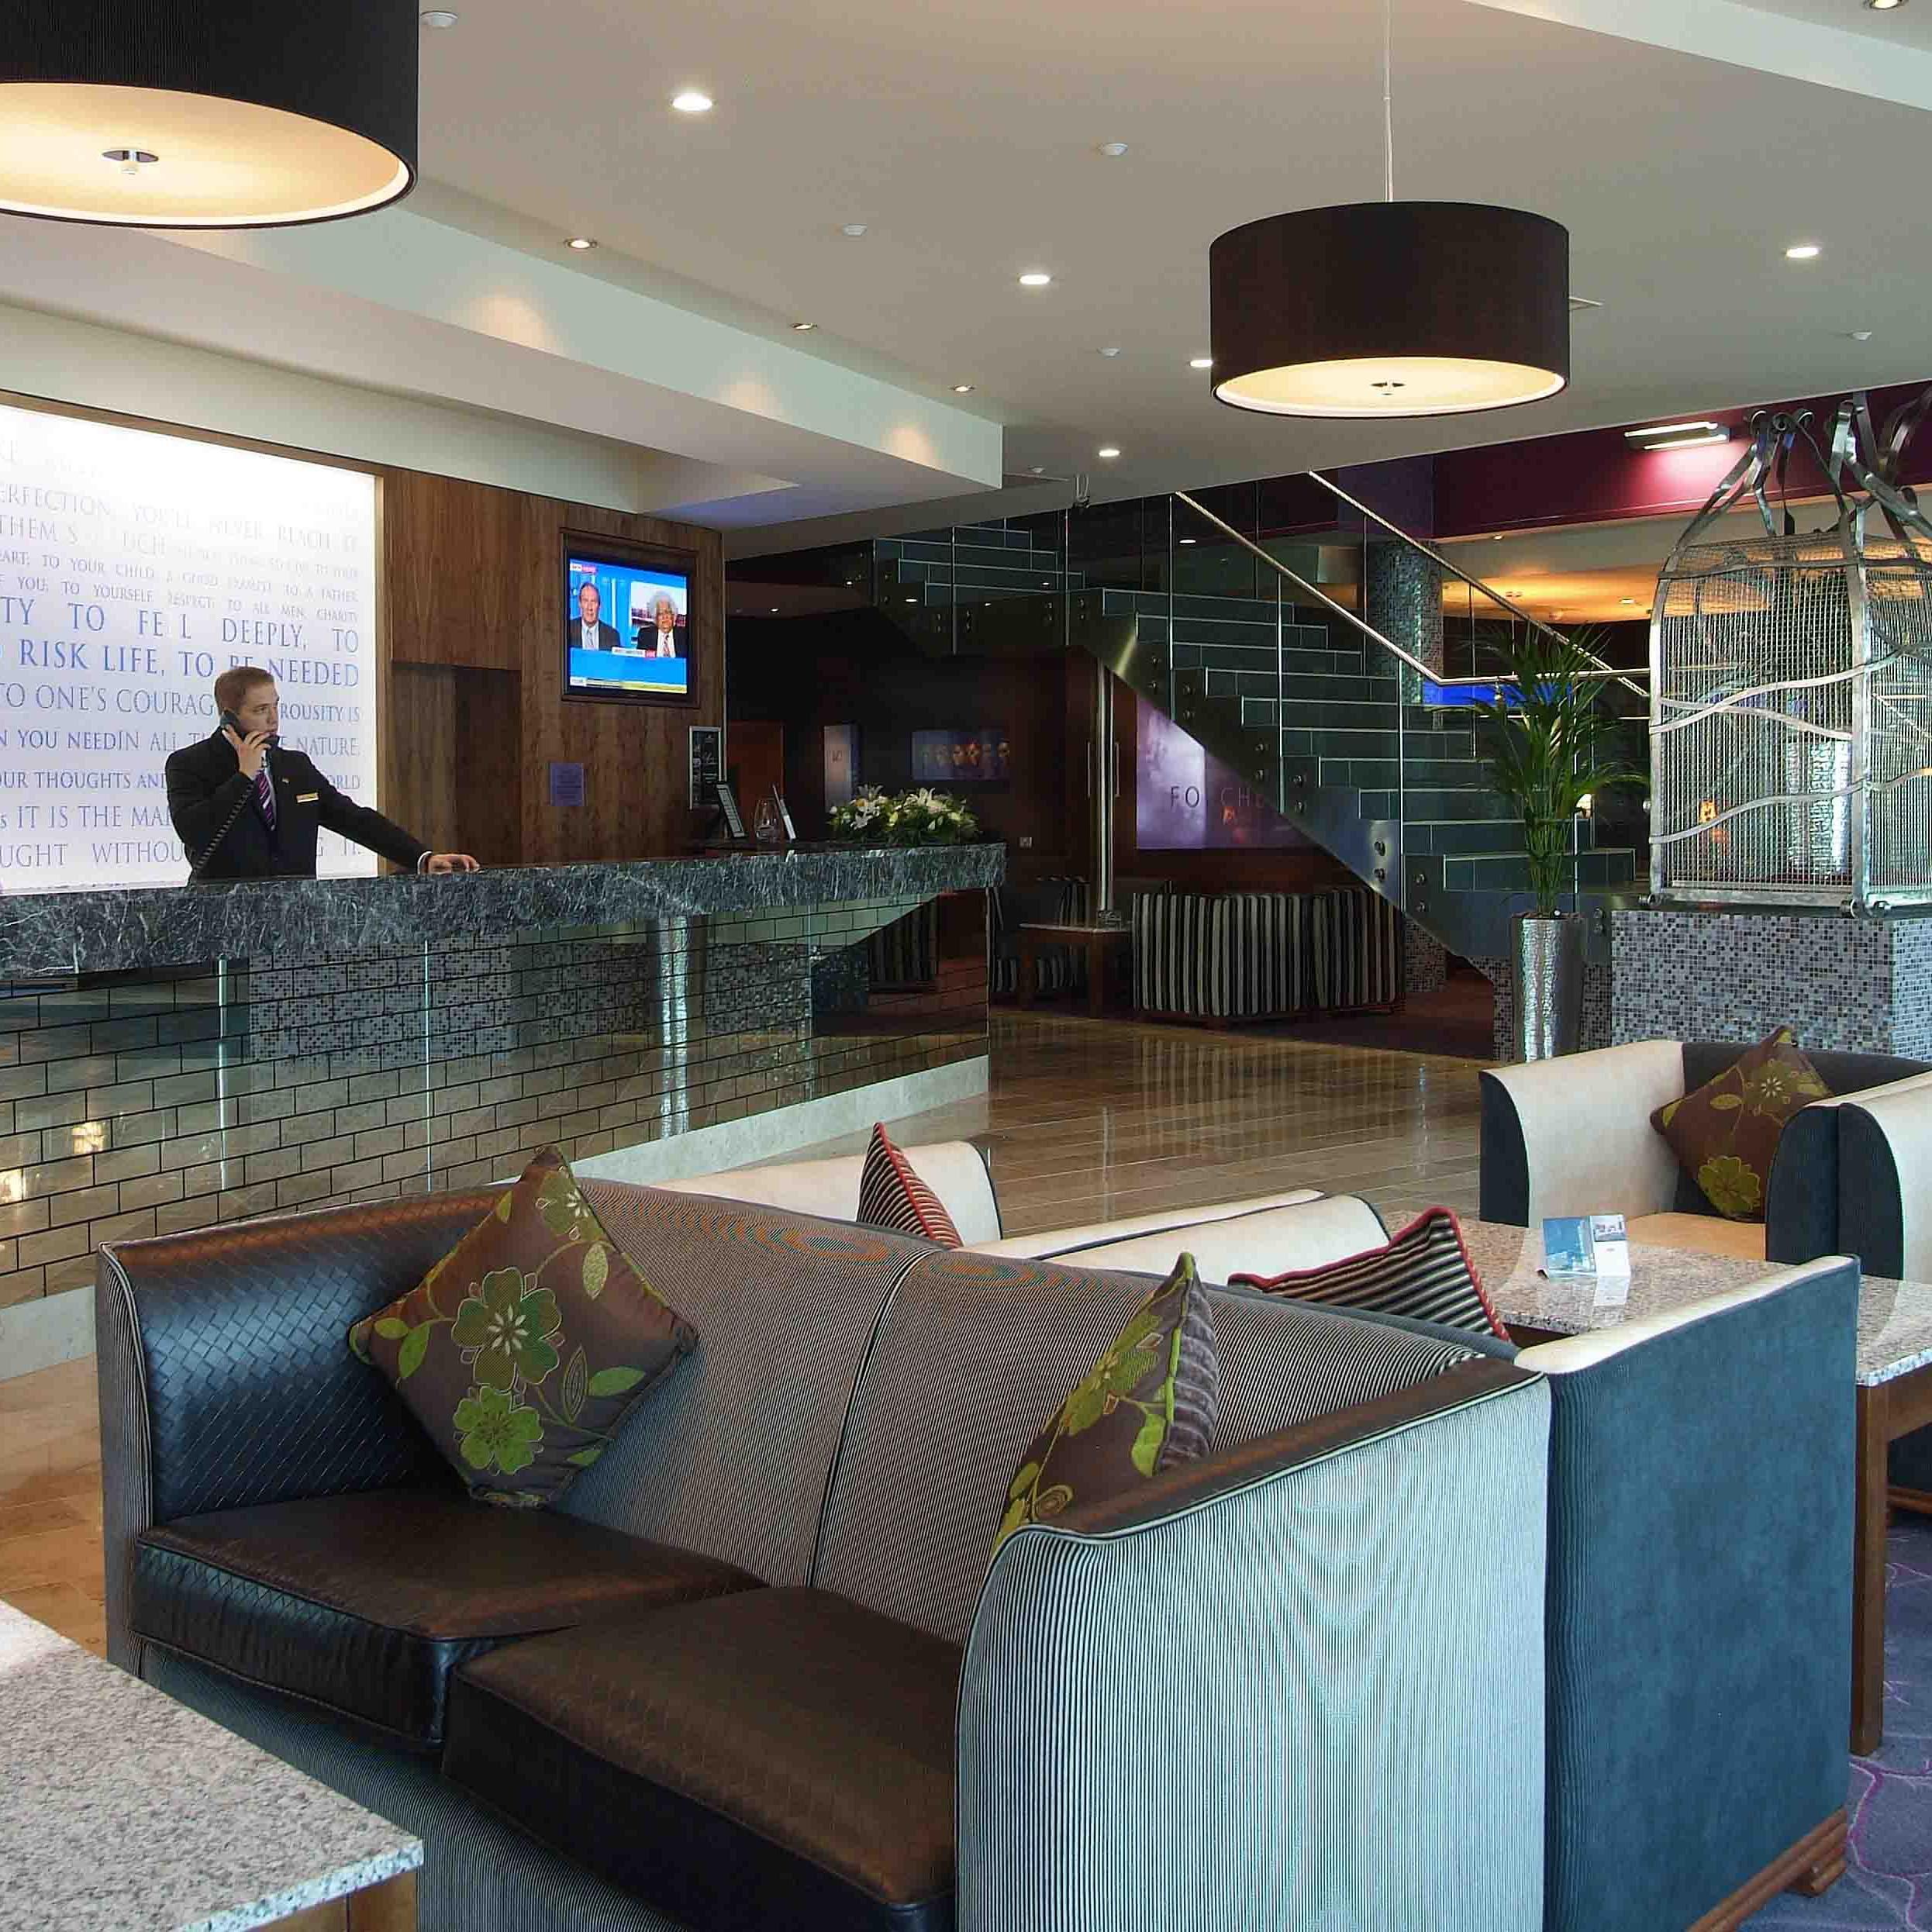 Welcome to Crowne Plaza Dublin Blanchardstown